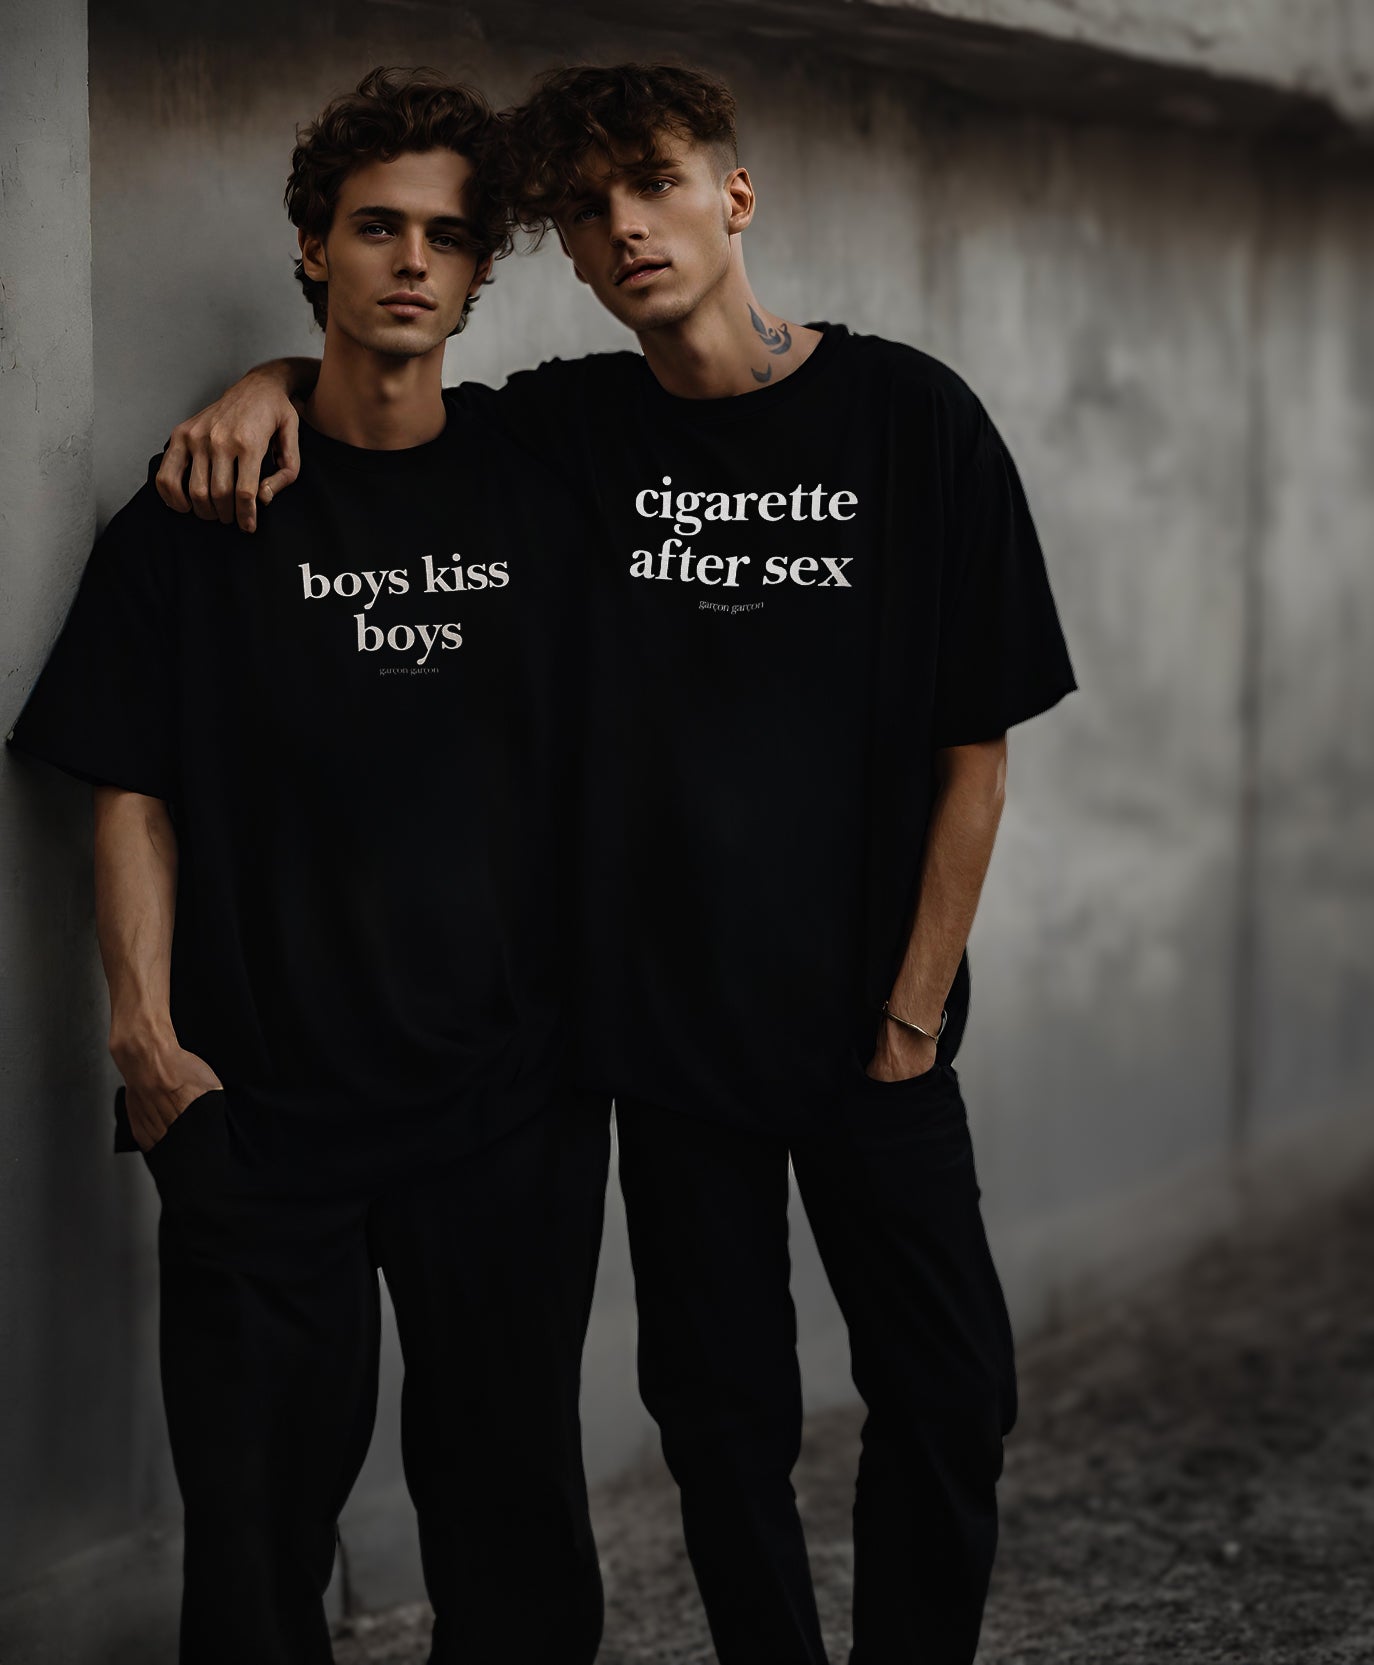 Two models stand side by side against a gray concrete wall, each sporting a bold statement t-shirt from Garçon Garçon. One t-shirt reads "boys kiss boys" and the other "cigarette after sex," both reflecting the brand's edge and commitment to free expression. They exude confidence and a cool, urban style that's signature to the Garçon Garçon aesthetic.